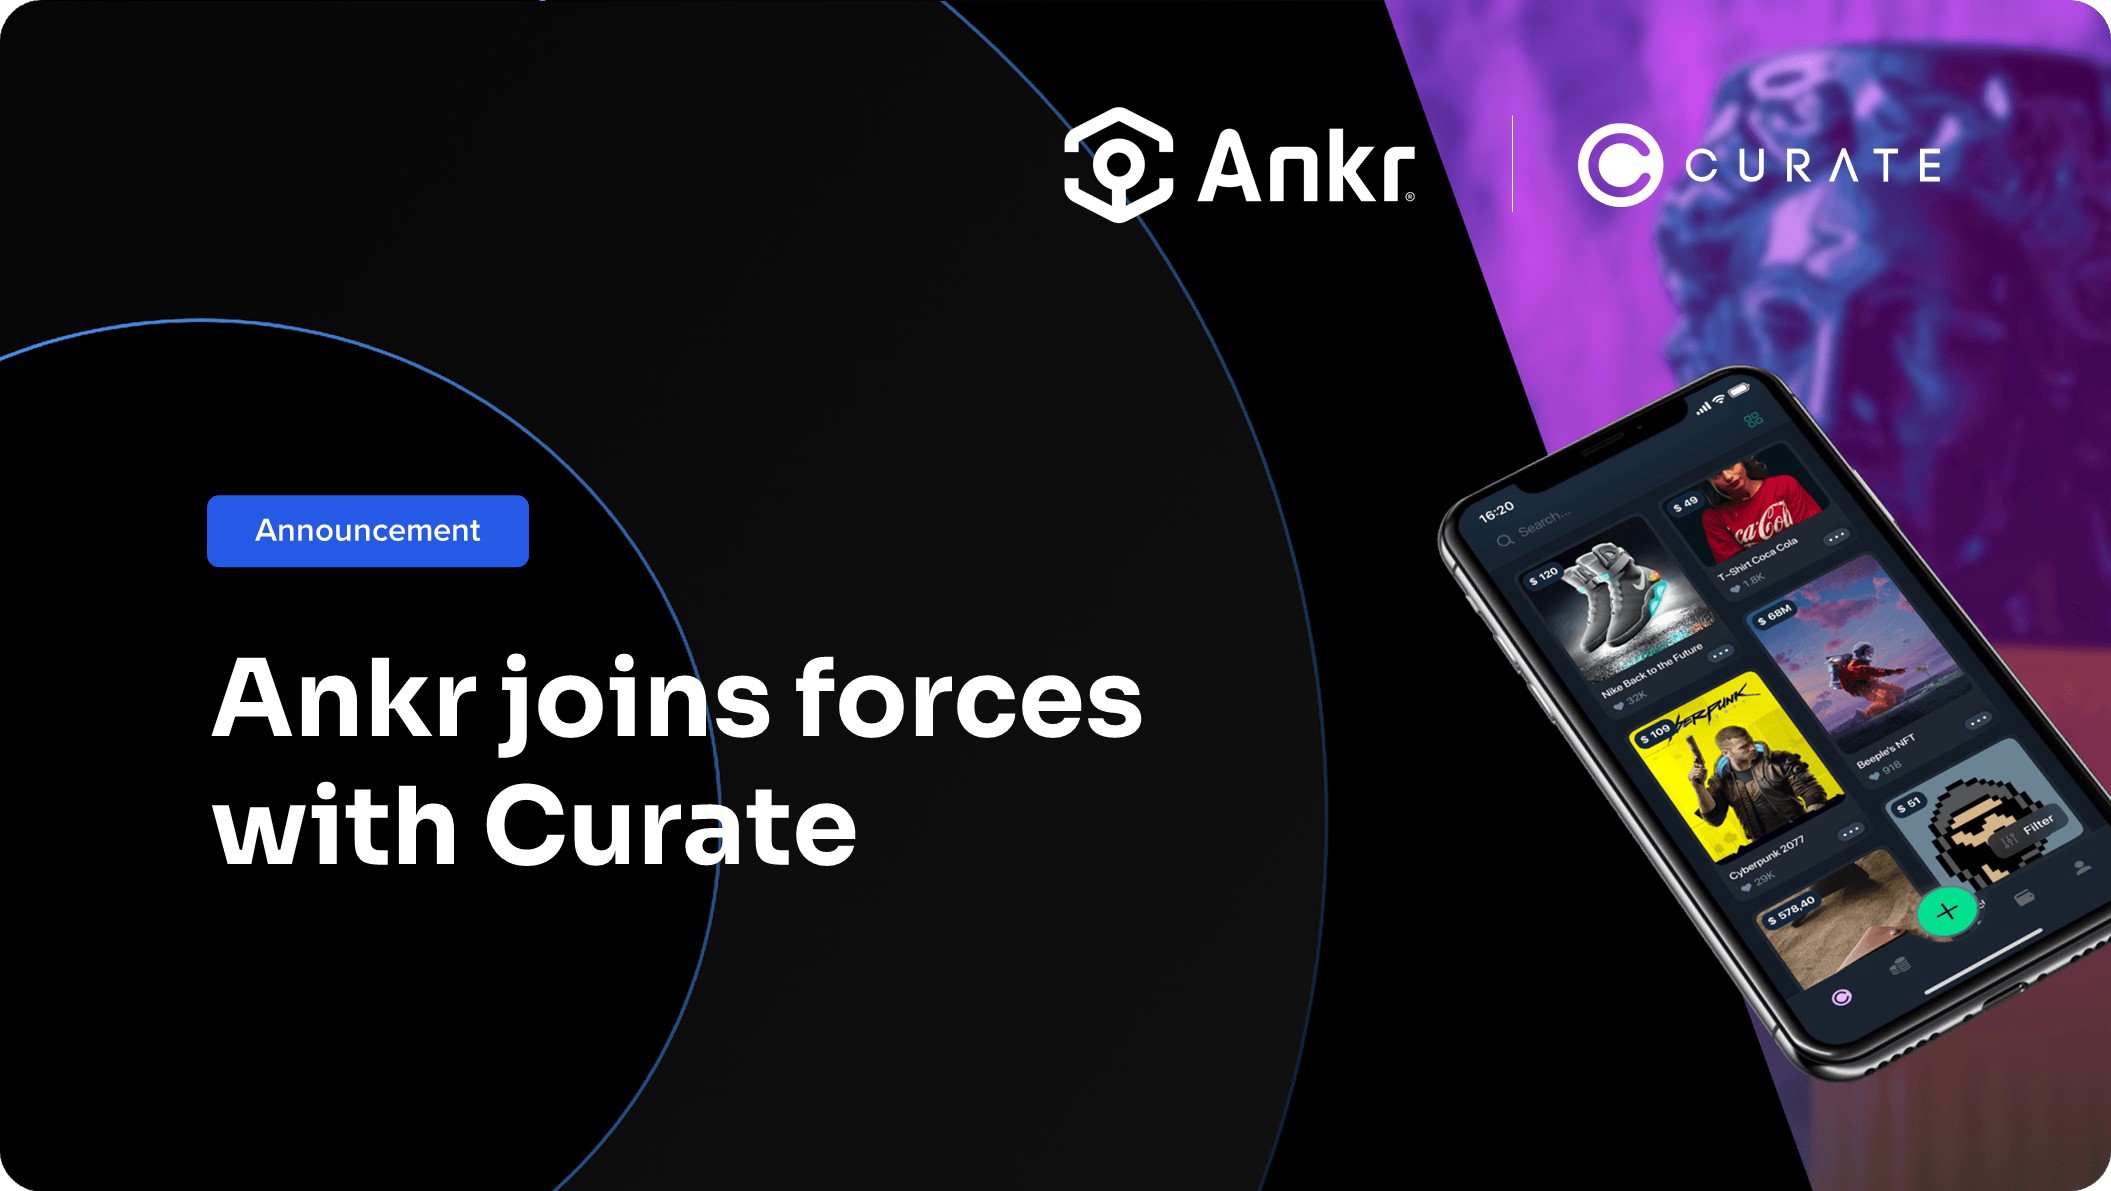 Ankr collaborated with Curate - Smart Liquidity Network